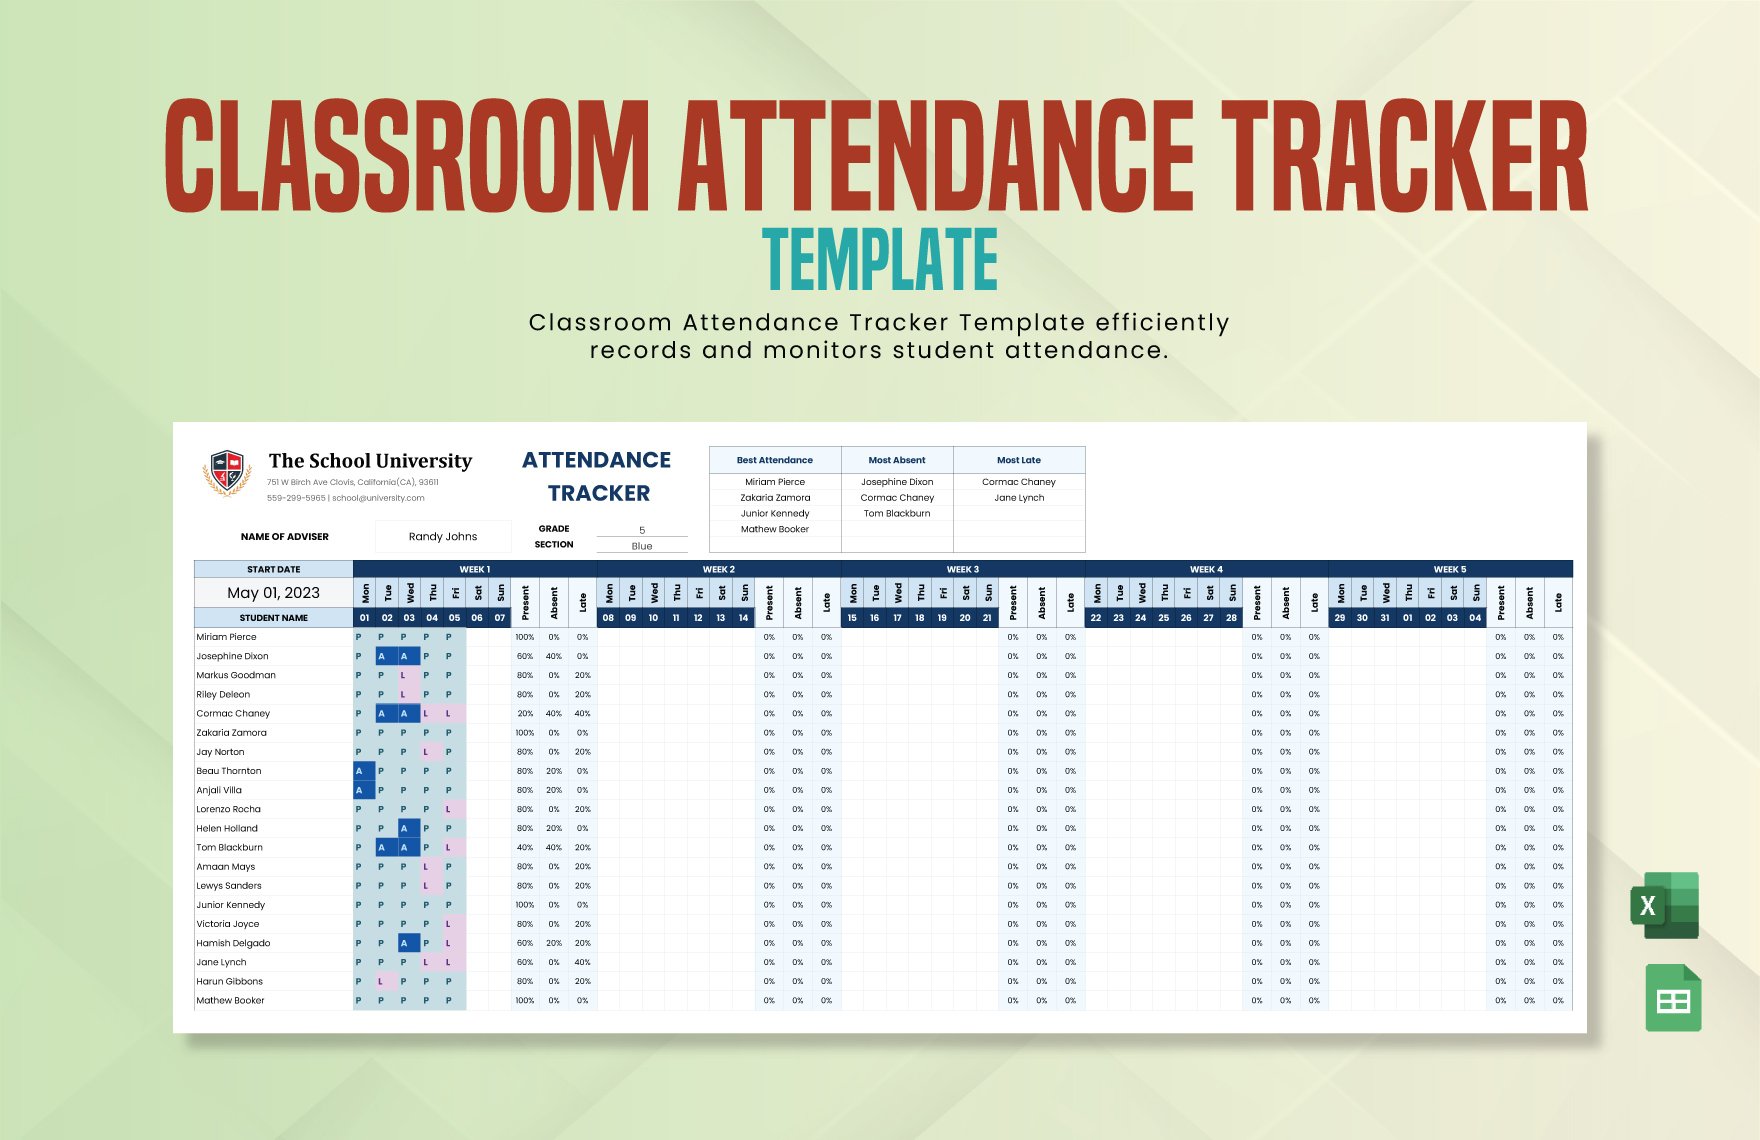 Classroom Attendance Tracker Template in Excel, Google Sheets